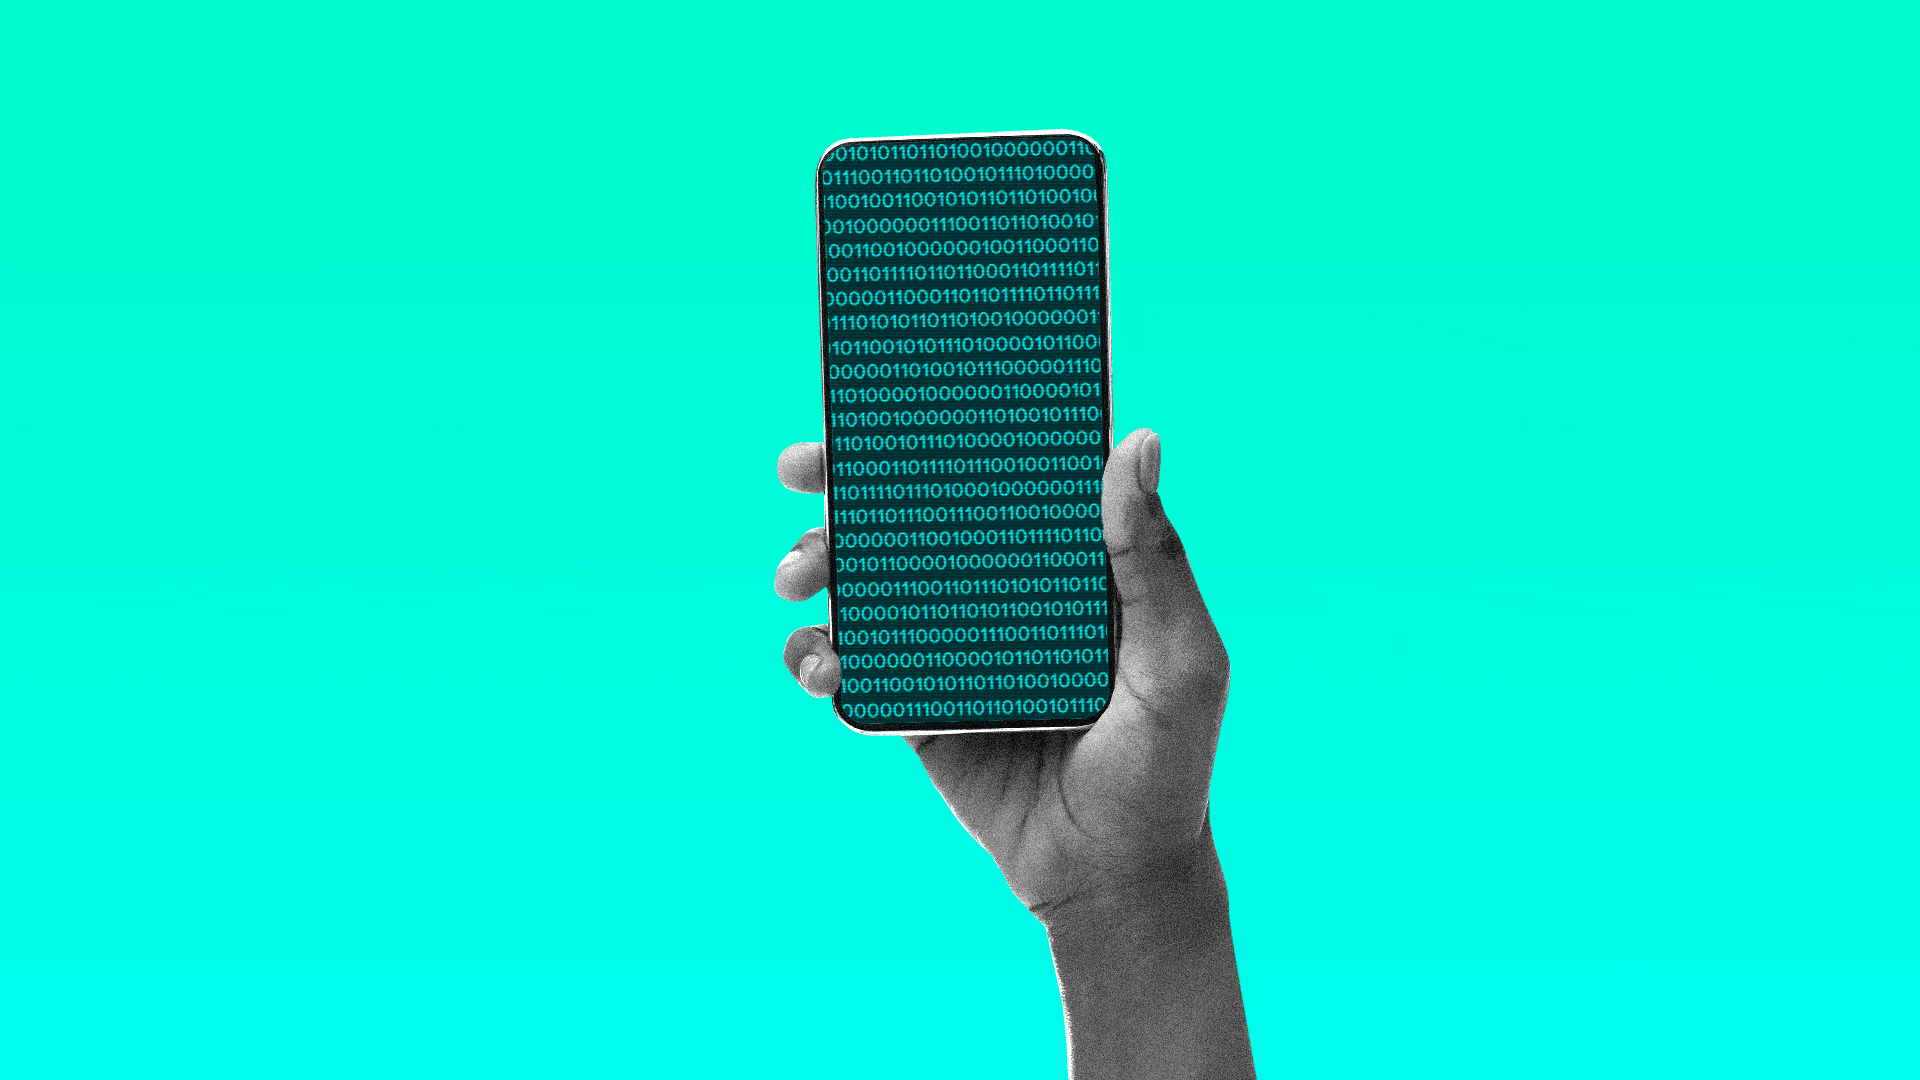 Illustration of a hand holding a phone with animated binary code scrolling by.